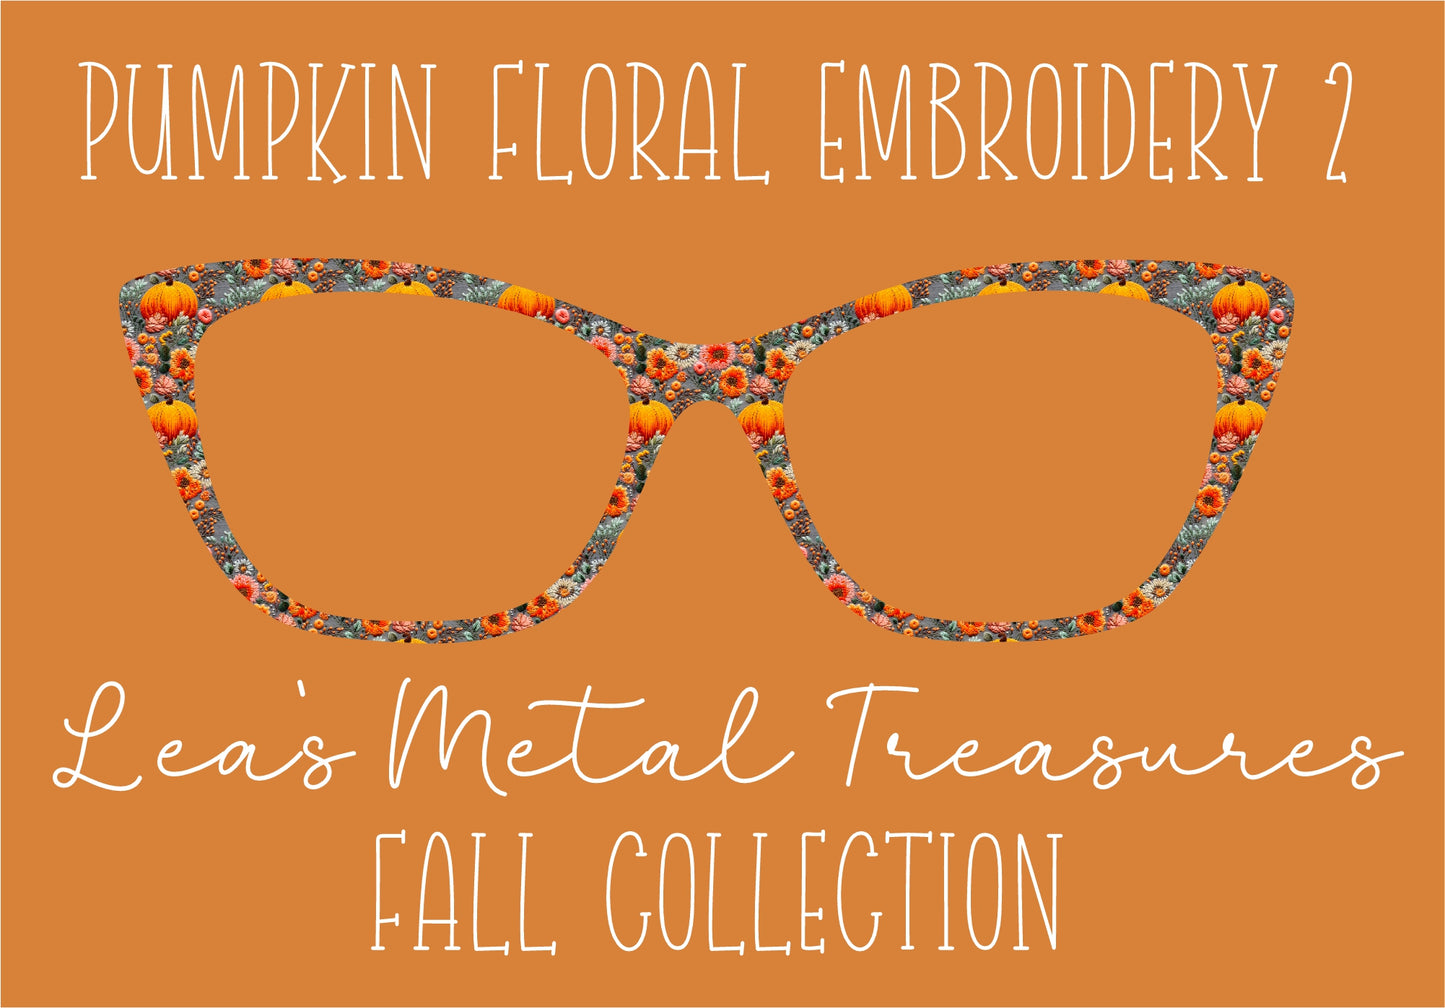 PUMPKIN FLORAL EMBROIDERY2 Eyewear Frame Toppers COMES WITH MAGNETS